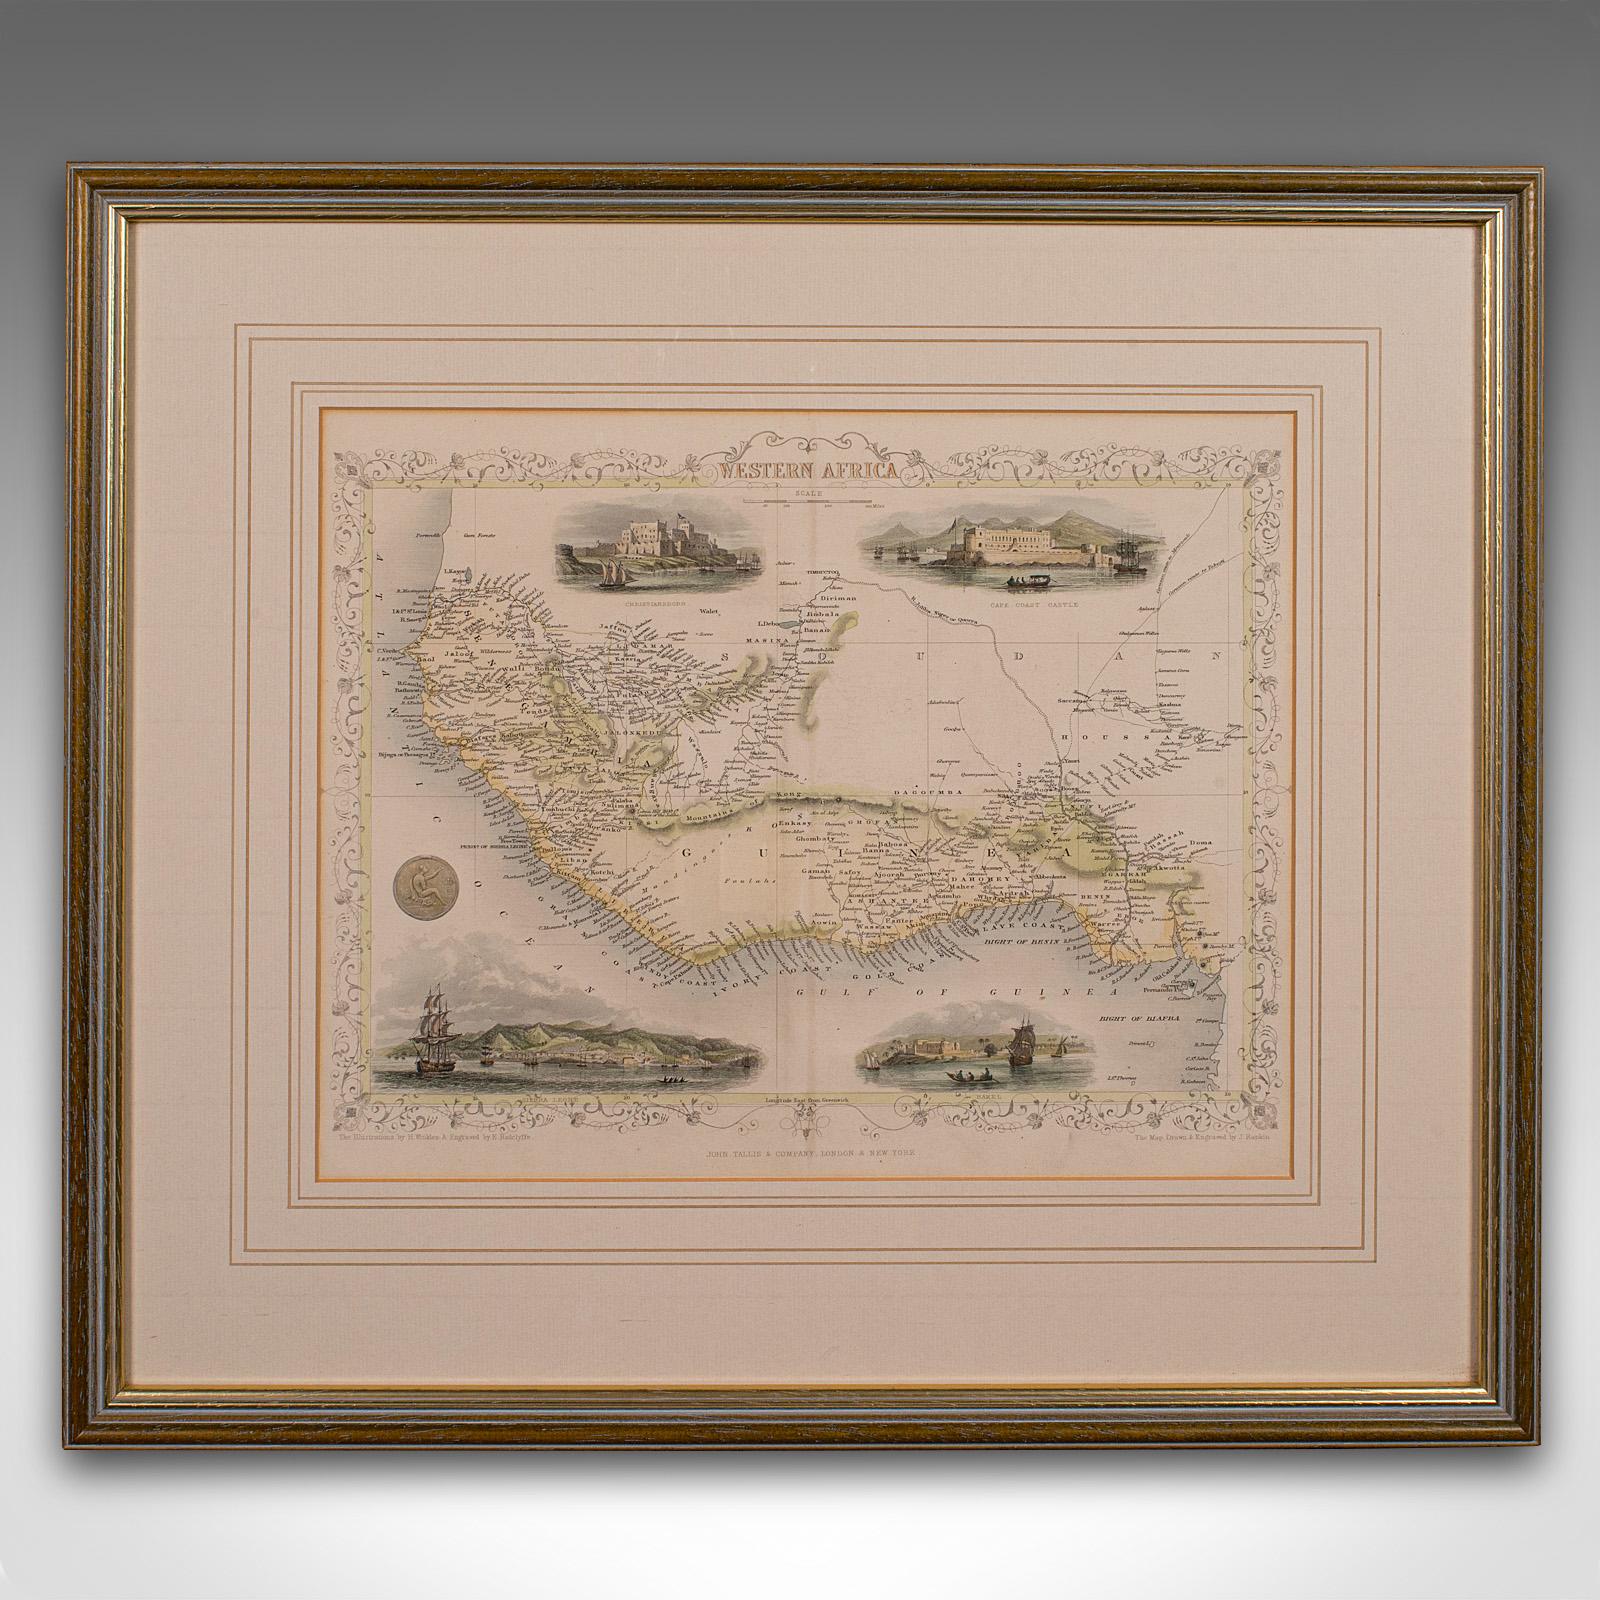 This is an antique lithography map of Western Africa. An English, framed atlas engraving of cartographic interest by John Rapkin, dating to the early Victorian period and later, circa 1850.

John Rapkin was considered as one of the best map makers